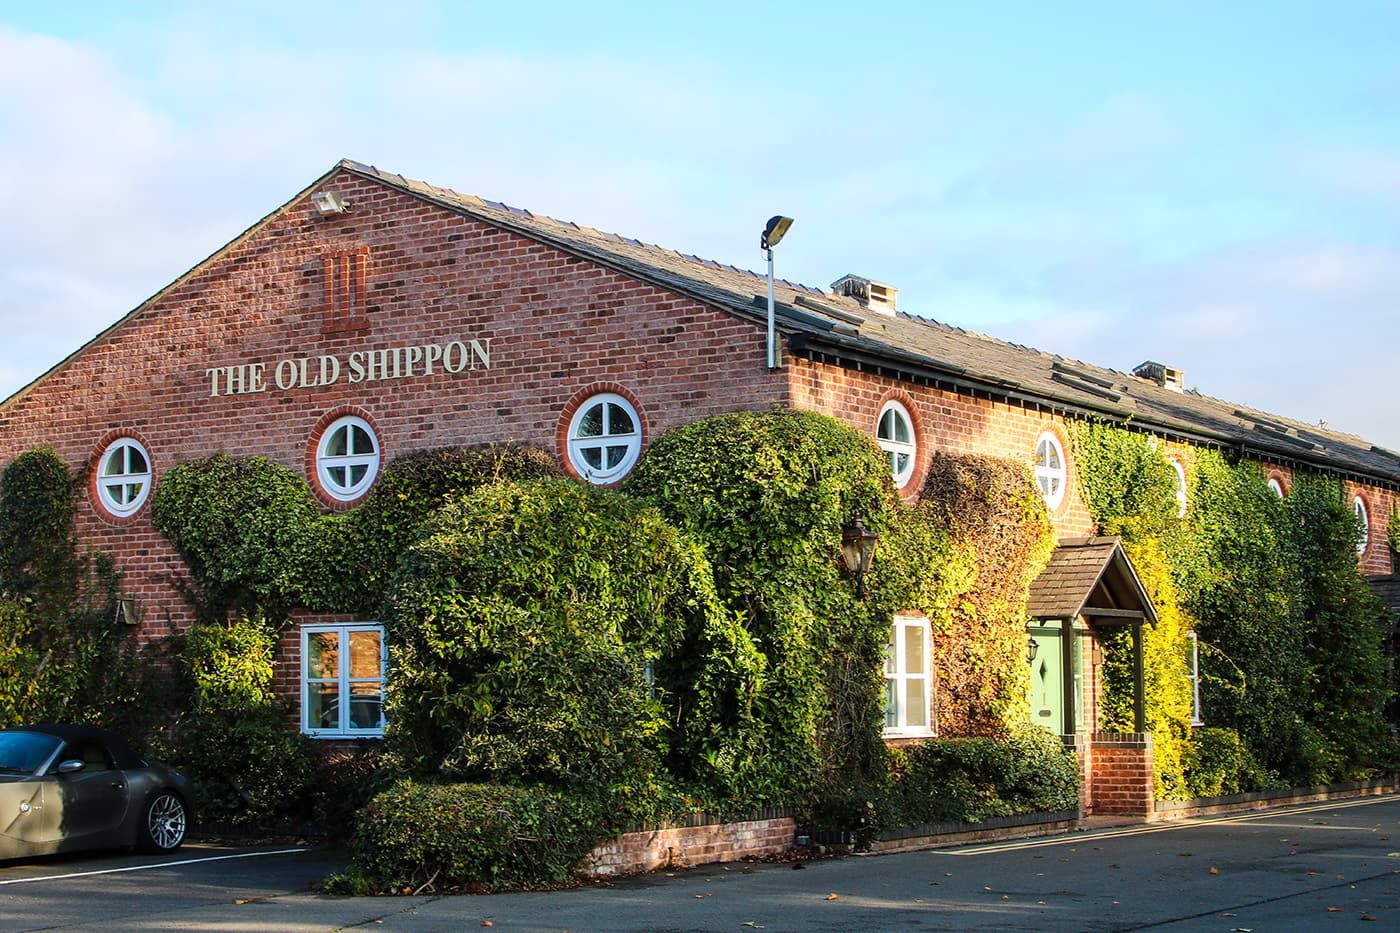 The Old Shippon